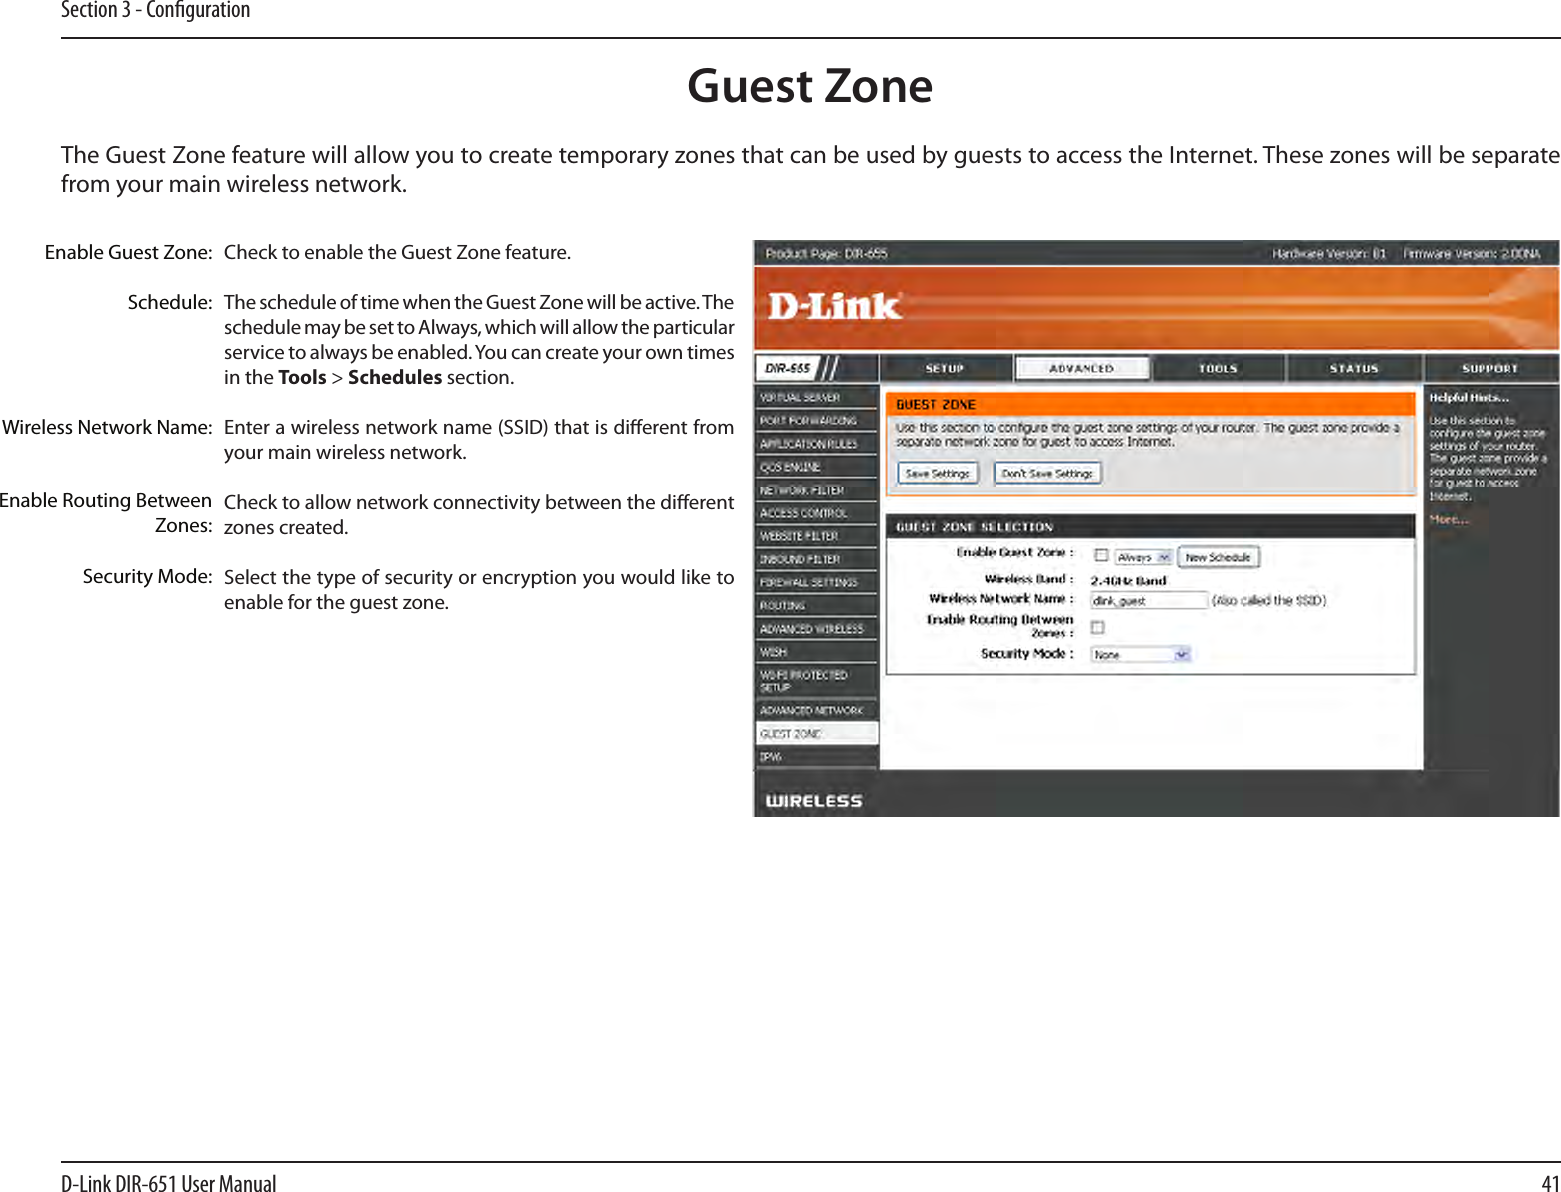 41D-Link DIR-651 User ManualSection 3 - CongurationGuest ZoneCheck to enable the Guest Zone feature. The schedule of time when the Guest Zone will be active. The schedule may be set to Always, which will allow the particular service to always be enabled. You can create your own times in the Tools &gt; Schedules section.Enter a wireless network name (SSID) that is dierent from your main wireless network.Check to allow network connectivity between the dierent zones created. Select the type of security or encryption you would like to enable for the guest zone.  Enable Guest Zone:Schedule:Wireless Network Name:Enable Routing Between Zones:Security Mode:The Guest Zone feature will allow you to create temporary zones that can be used by guests to access the Internet. These zones will be separate from your main wireless network. 